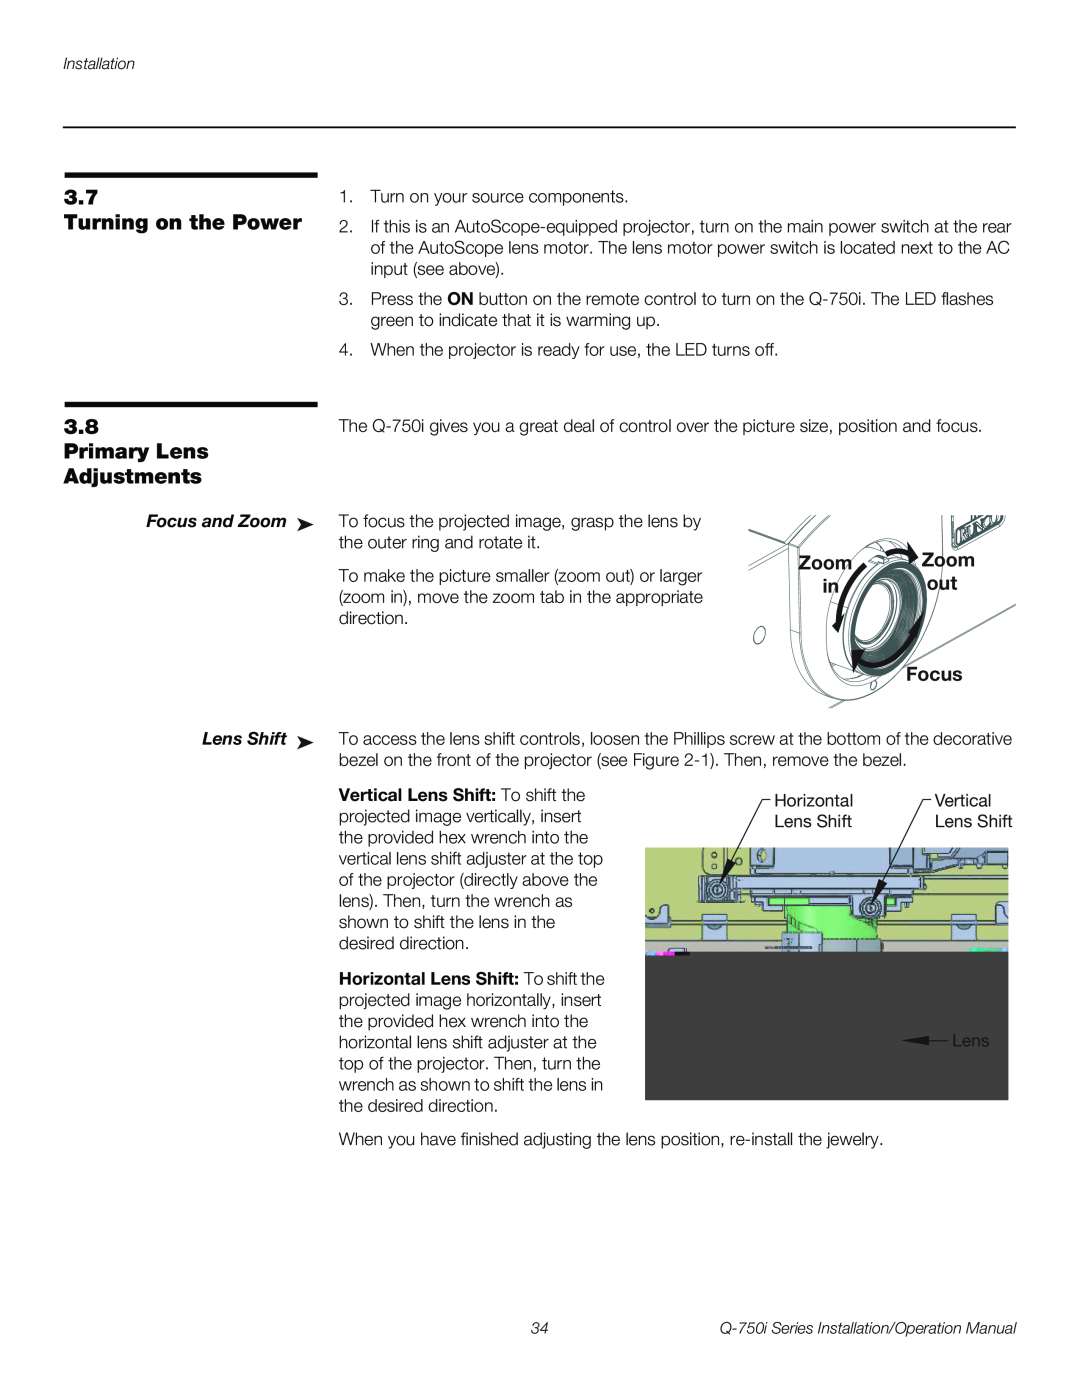 Runco Q-750I operation manual Turning on the Power, Primary Lens Adjustments, Zoom, Focus 